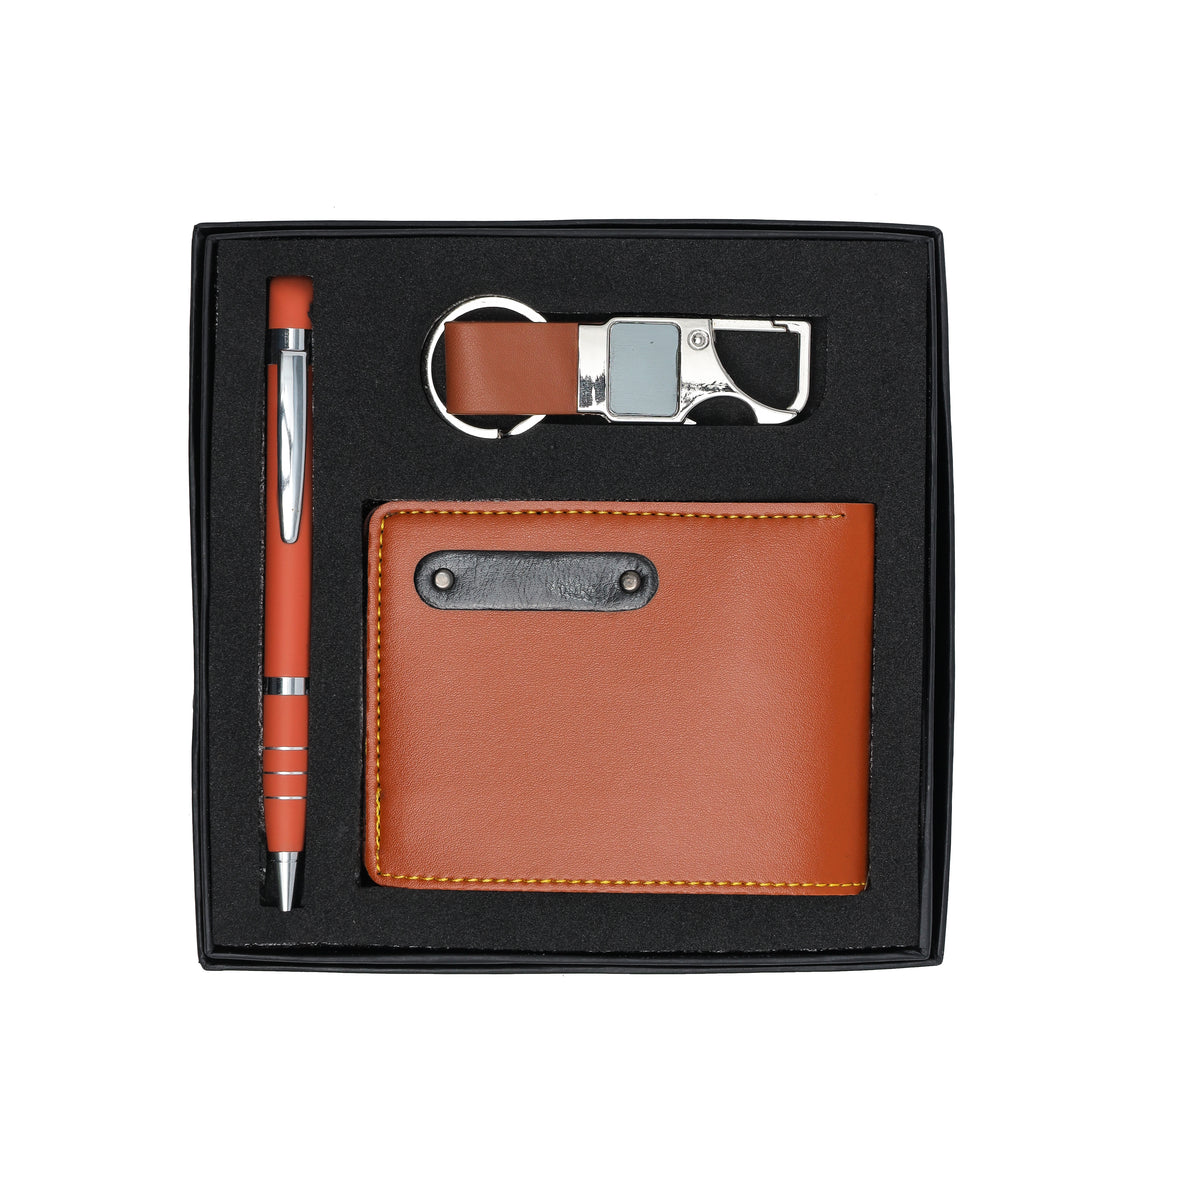 LASER ART Personalized Men's Essentials Gift Set: Premium Brown Leather Wallet, Elegant Pen, and Custom Key-Chain – The Gift for The Modern Gentleman